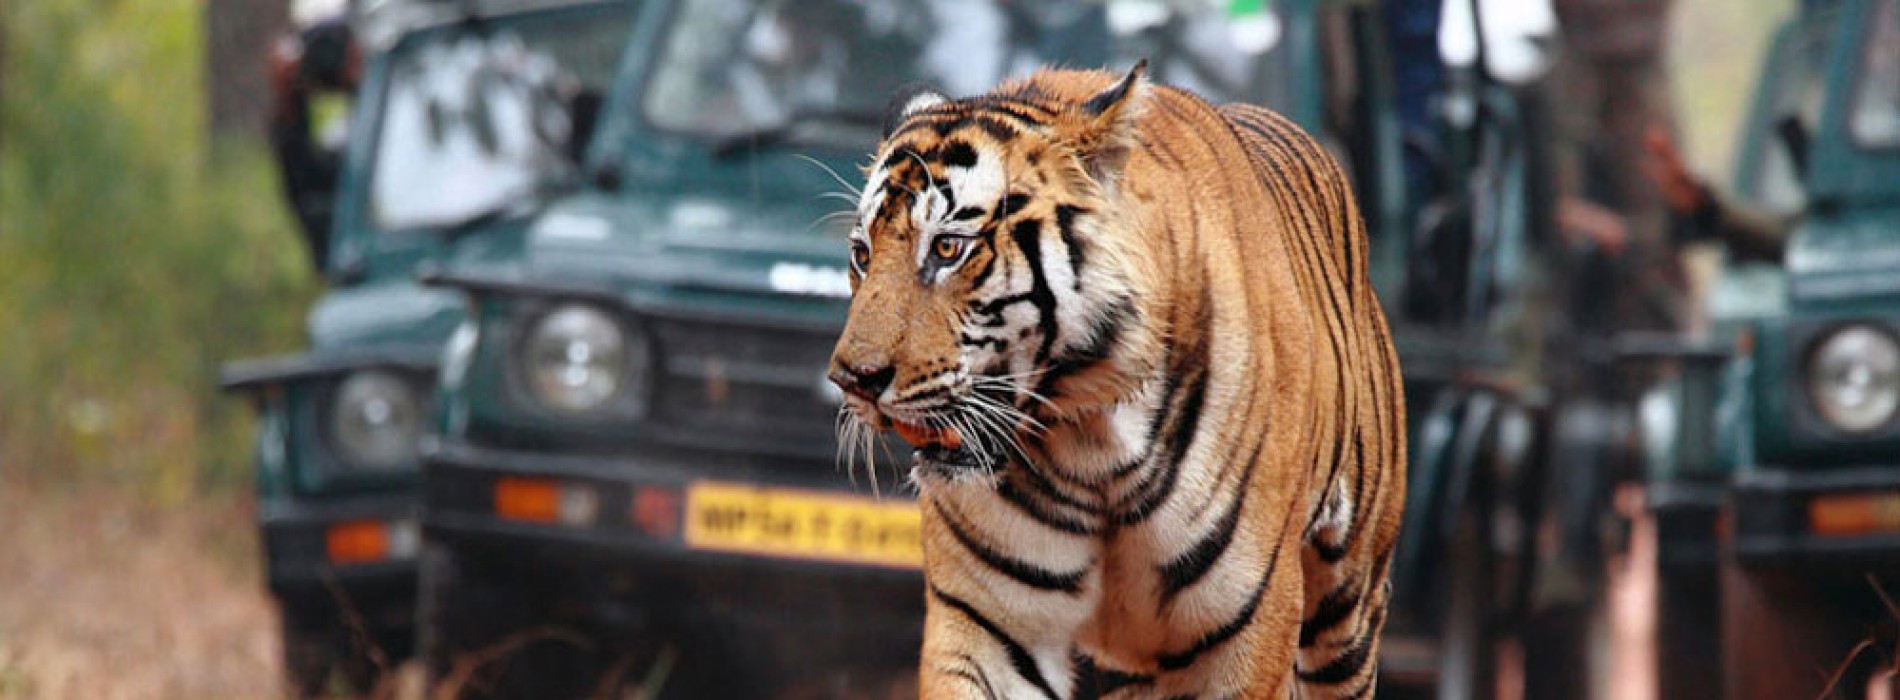 Bandhavgarh: National Park with rich historical past